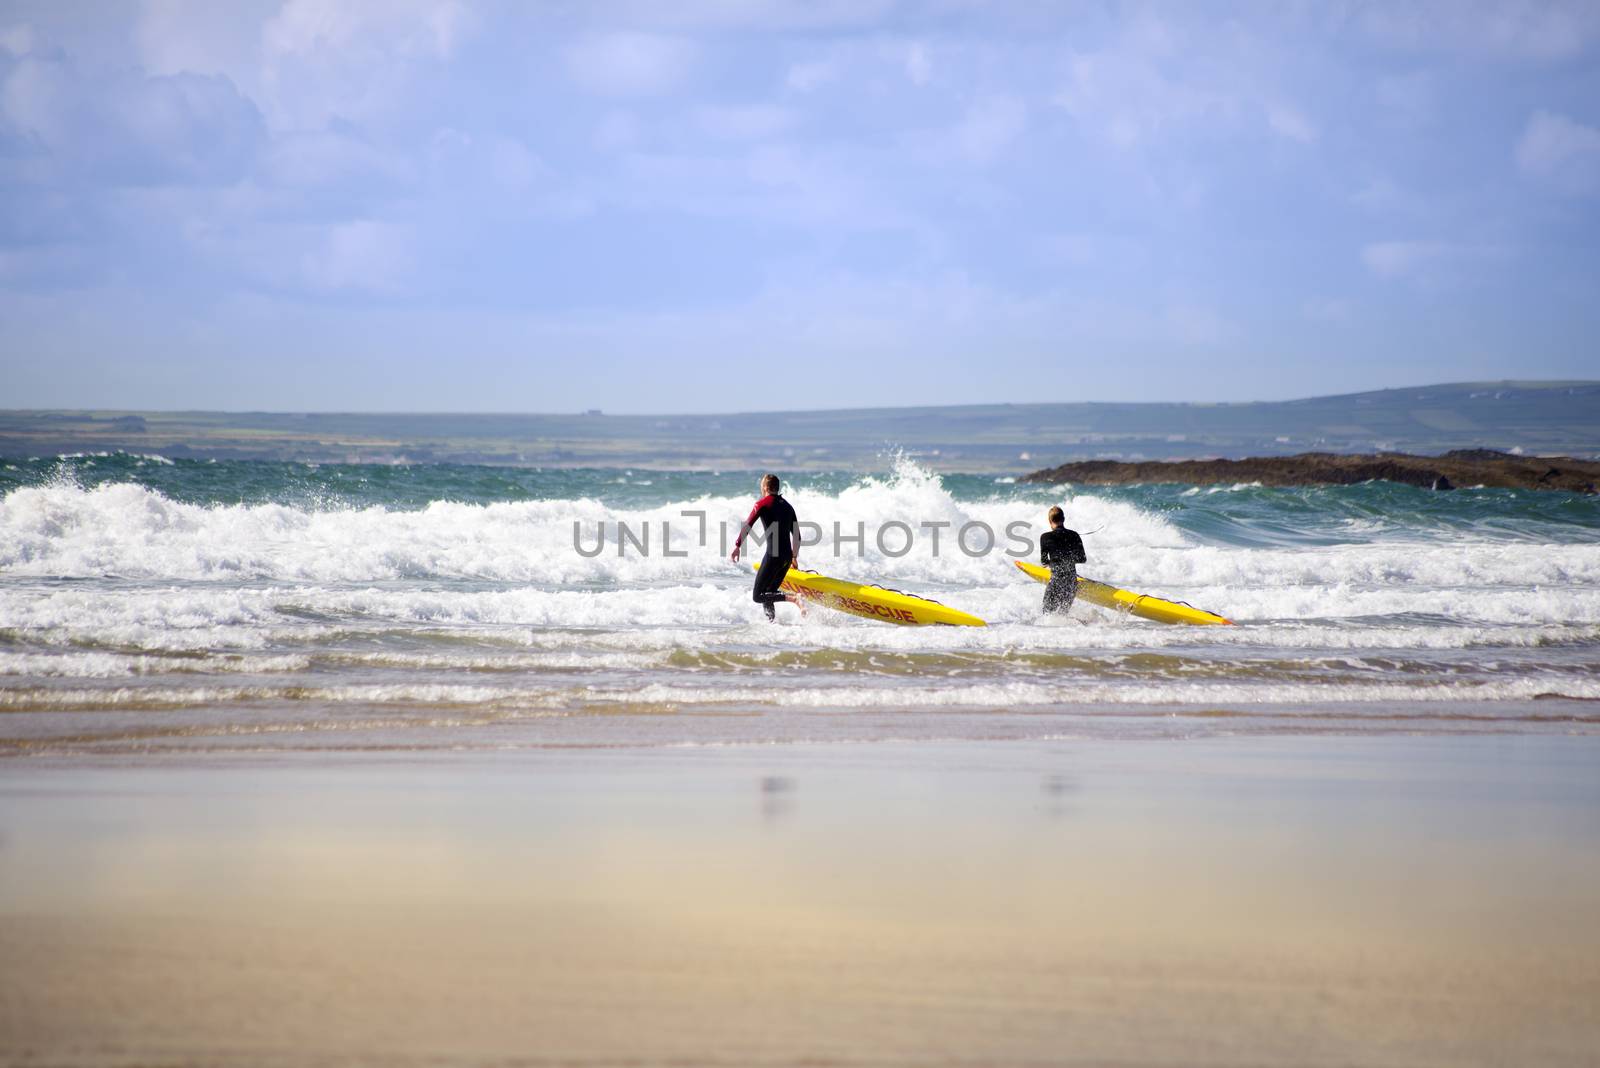 lifeguards training in the surf on ballybunion beach county kerry ireland